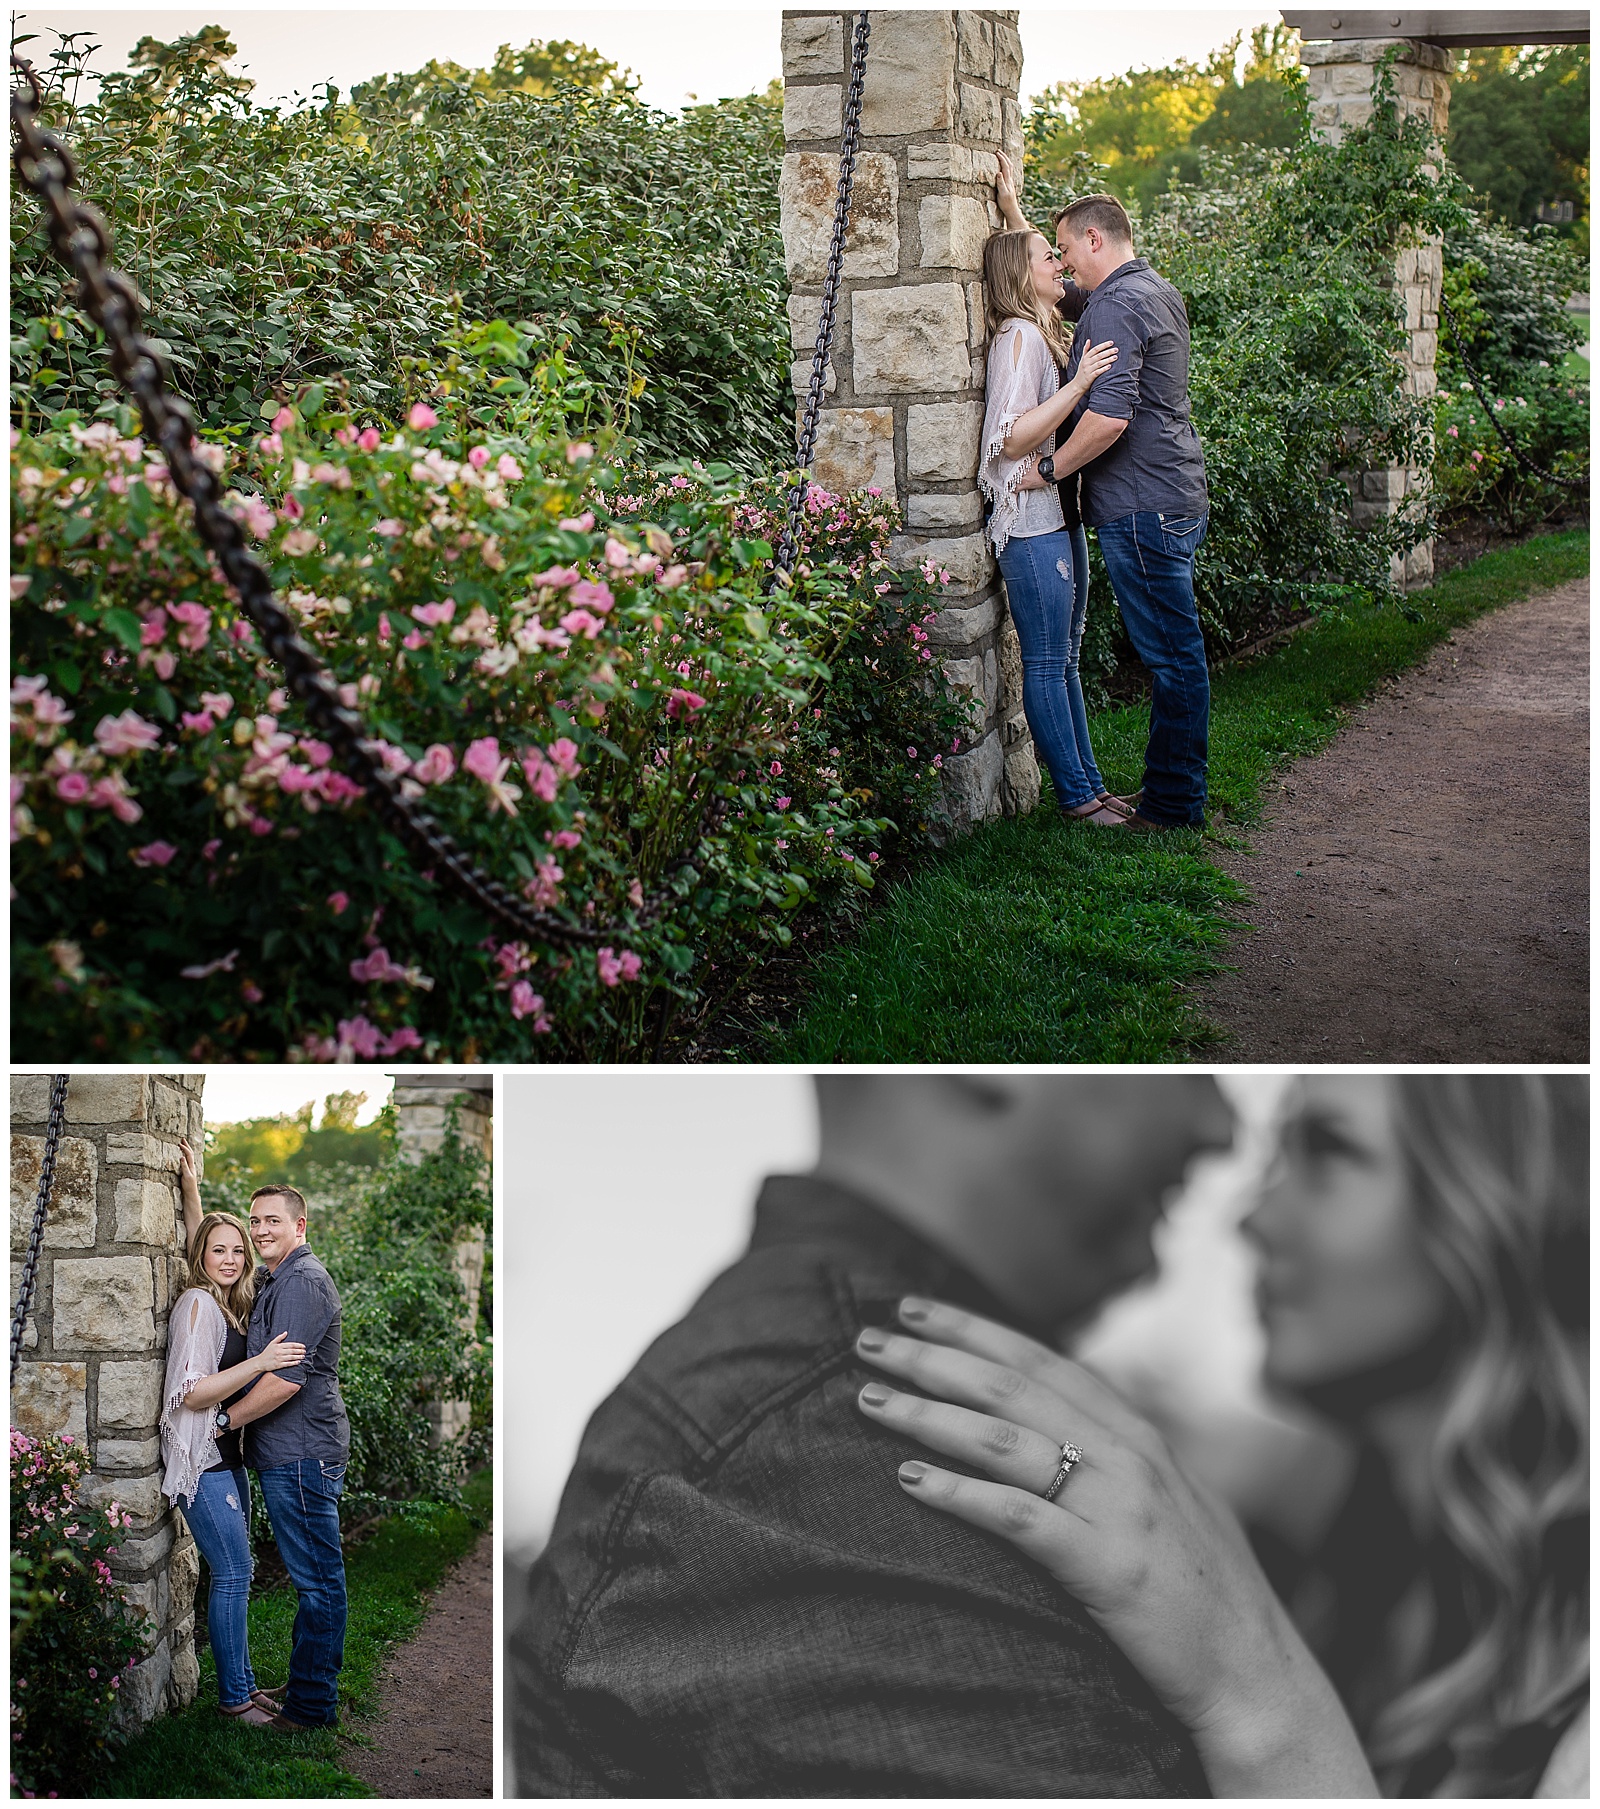 An engagement session at Loose Park in Kansas City.